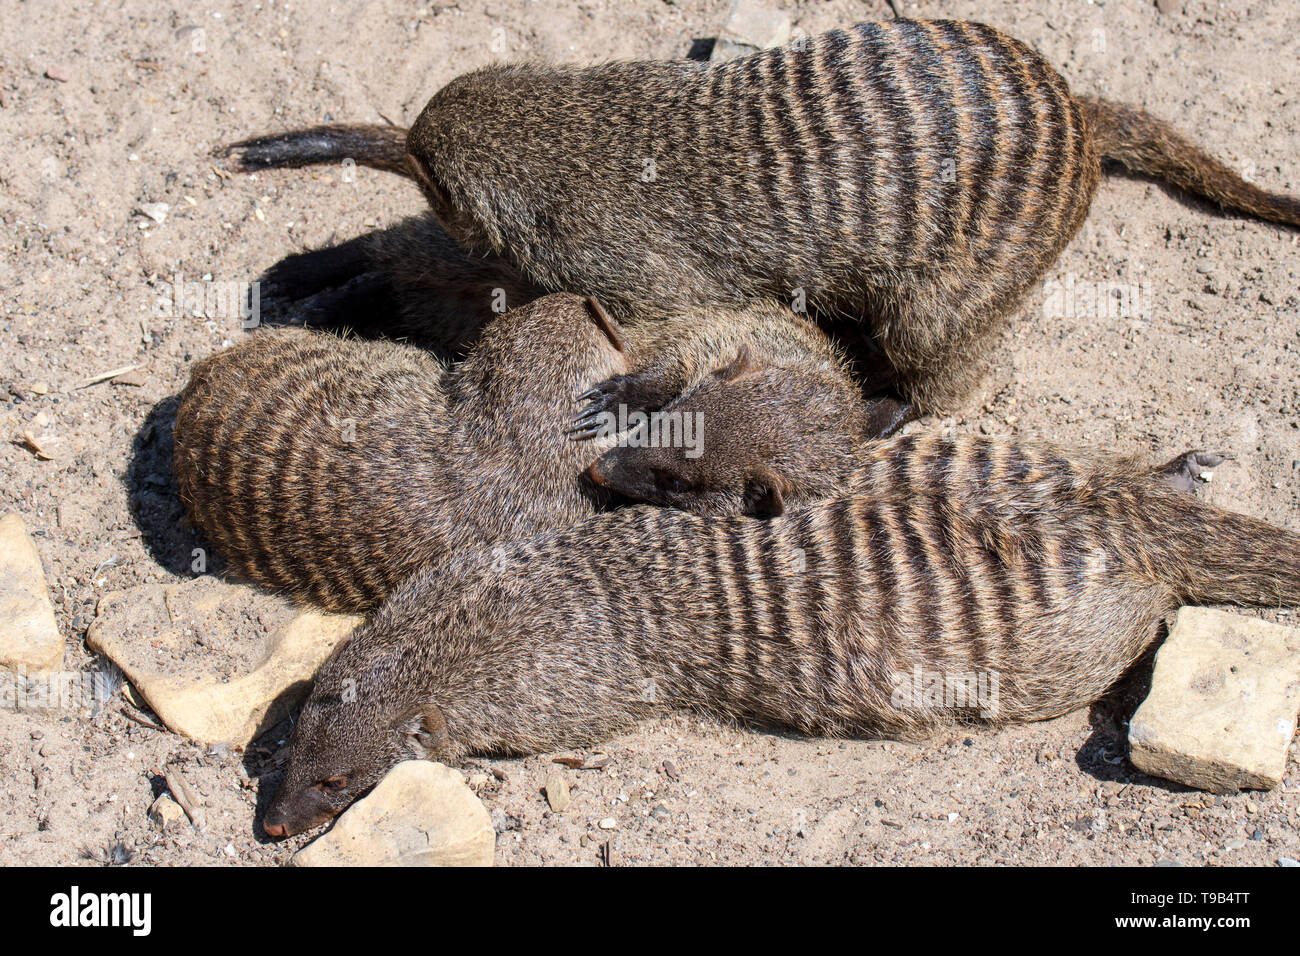 Snuggling banded mongooses (Mungos mungo) sleeping / resting huddled together in banded mongoose colony, native to Africa Stock Photo